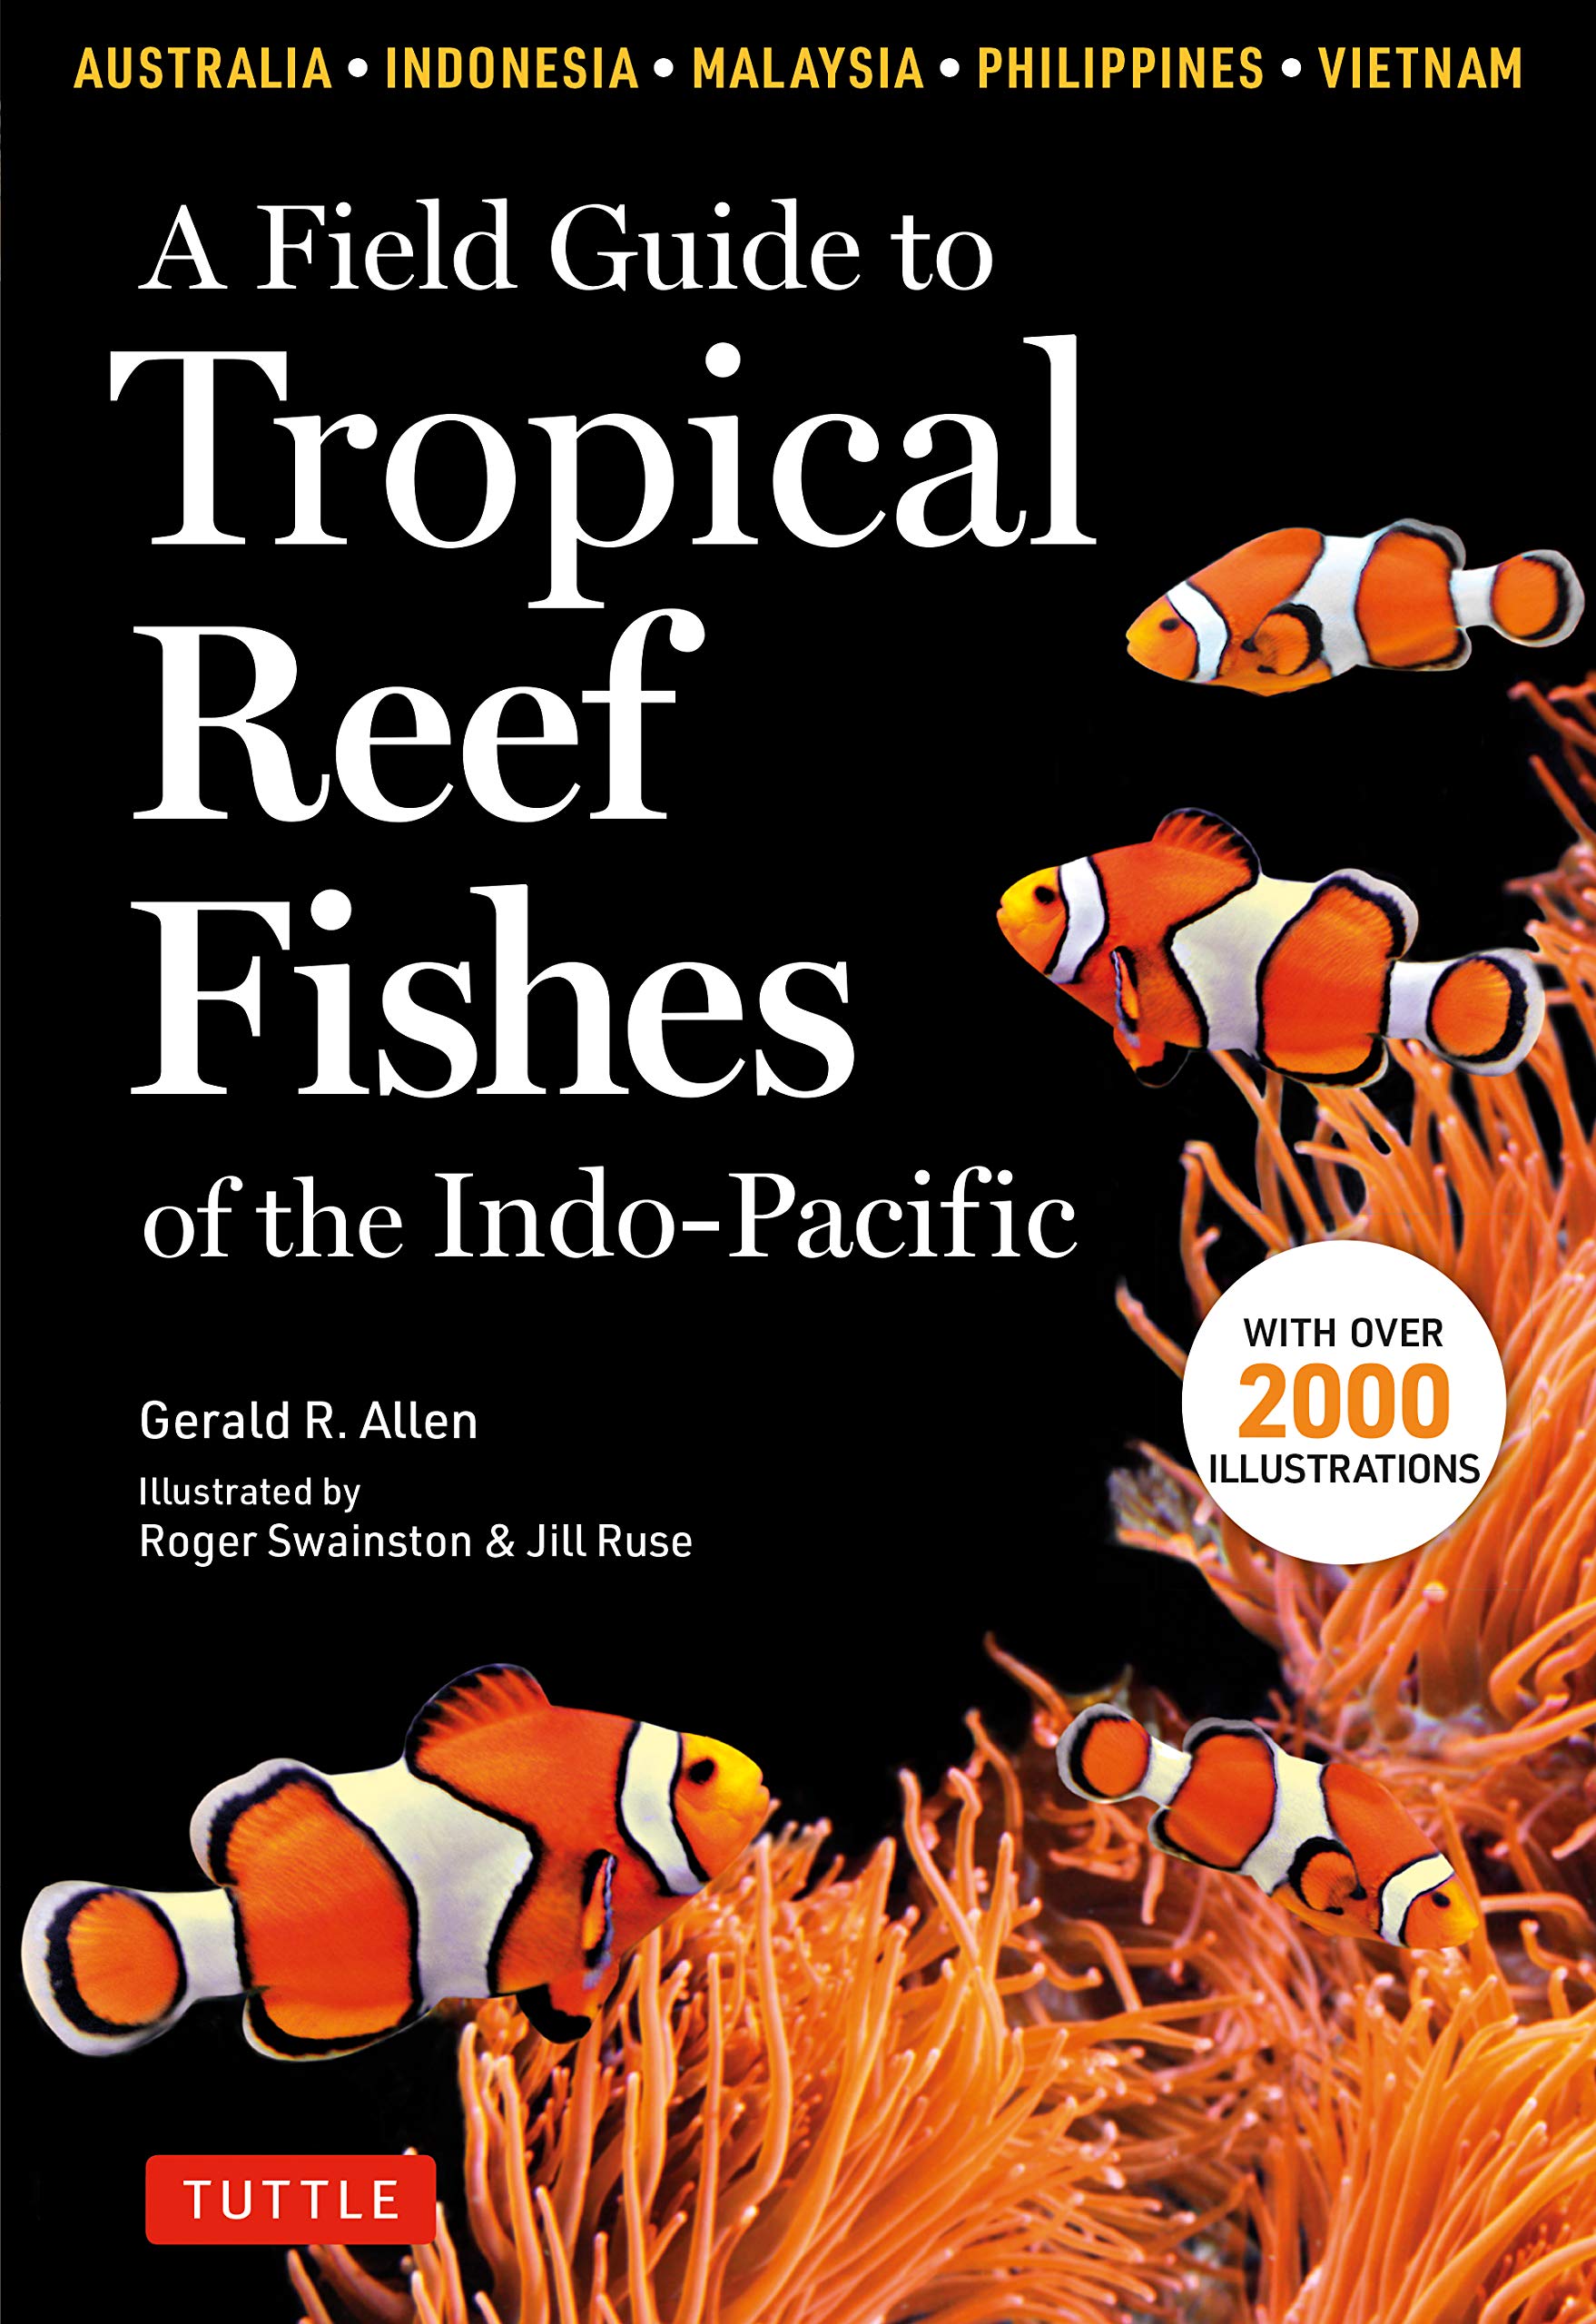 A Field Guide to Tropical Reef Fishes of the Indo-Pacific